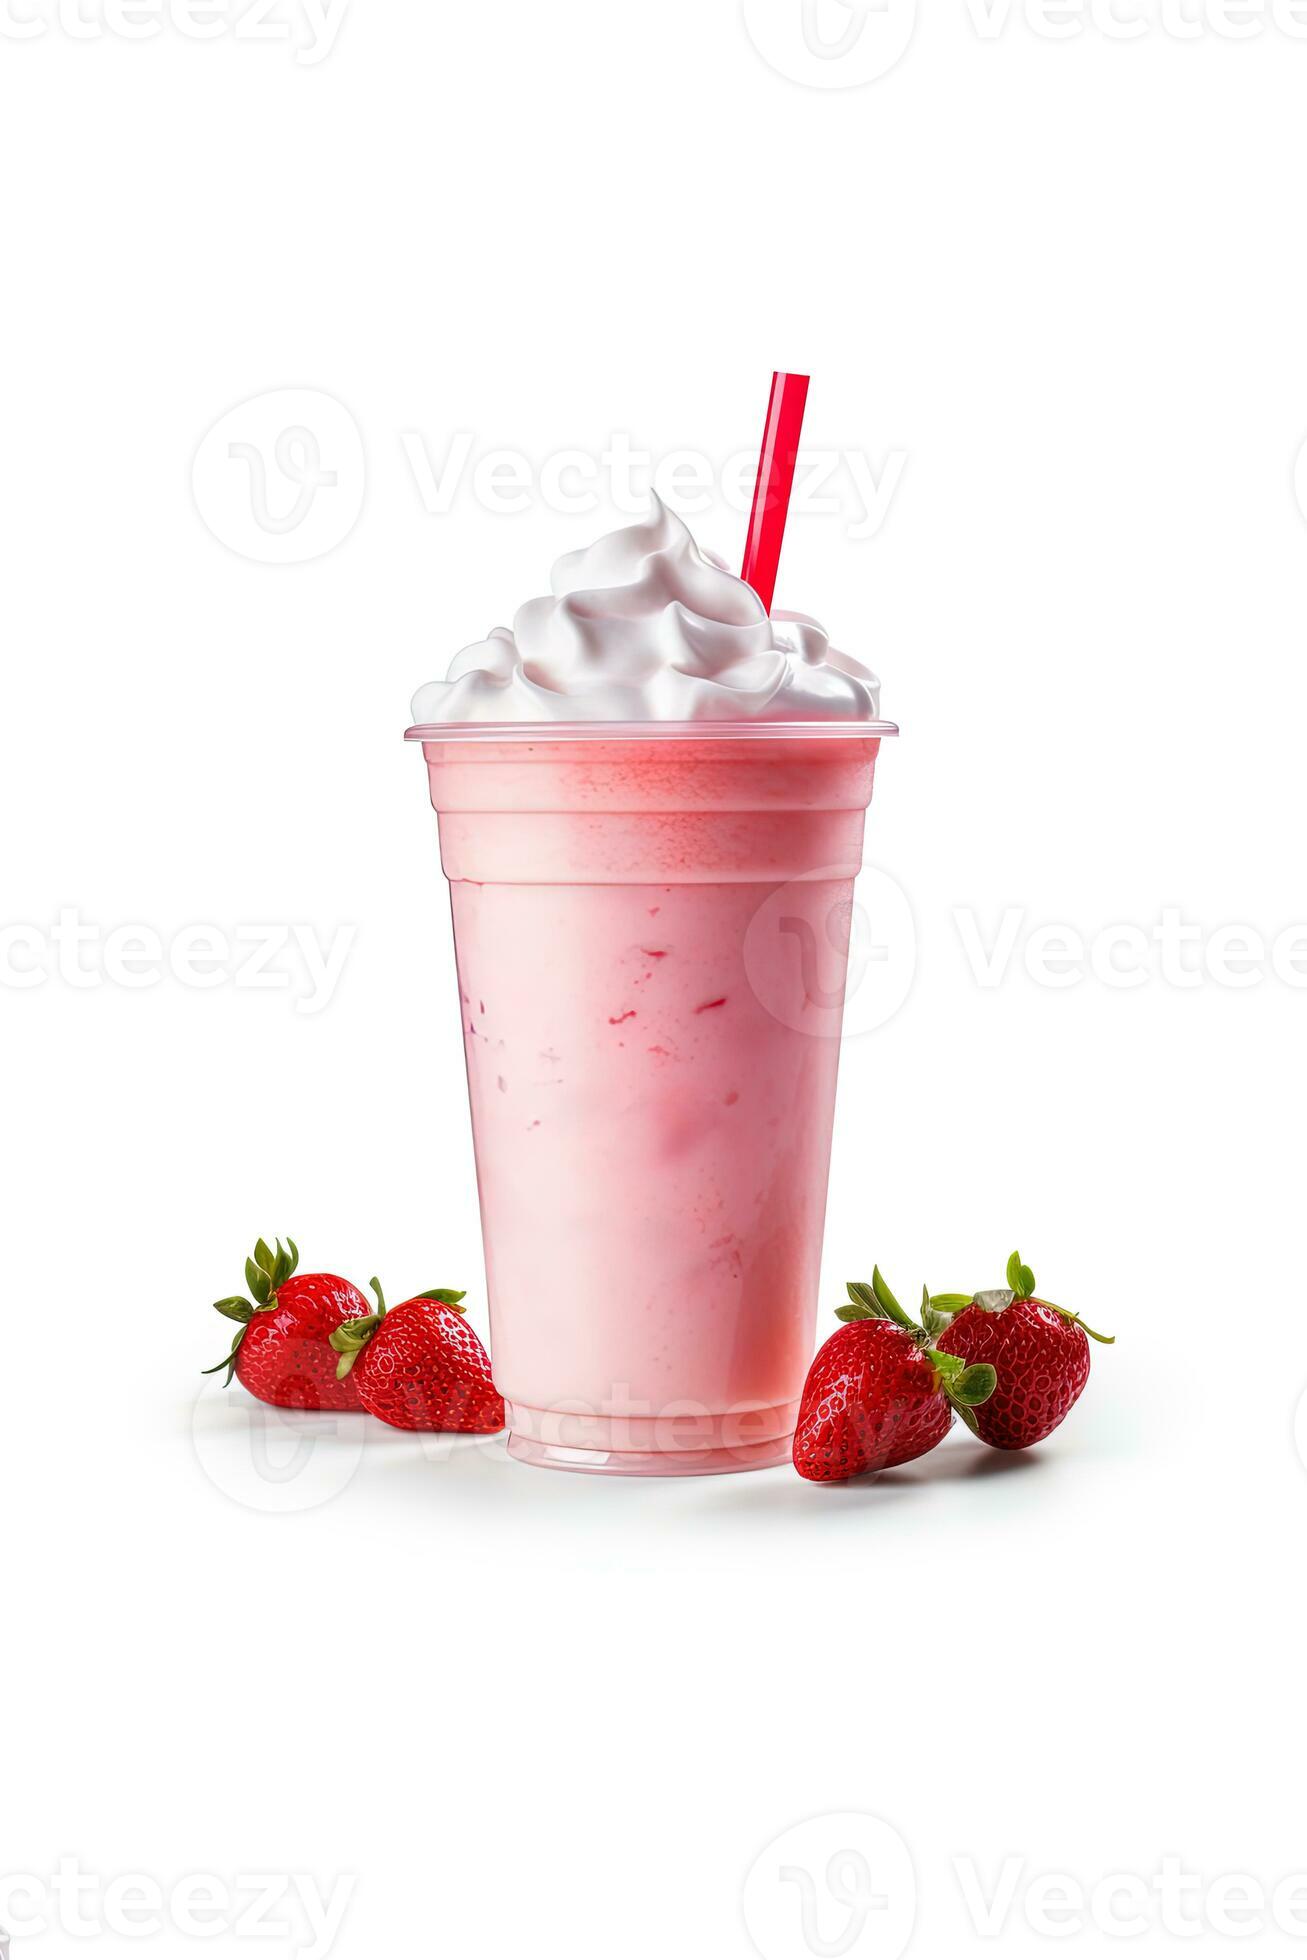 https://static.vecteezy.com/system/resources/previews/026/281/537/large_2x/strawberry-milkshake-in-plastic-takeaway-cup-isolated-on-white-background-with-copy-space-ai-generated-photo.jpg